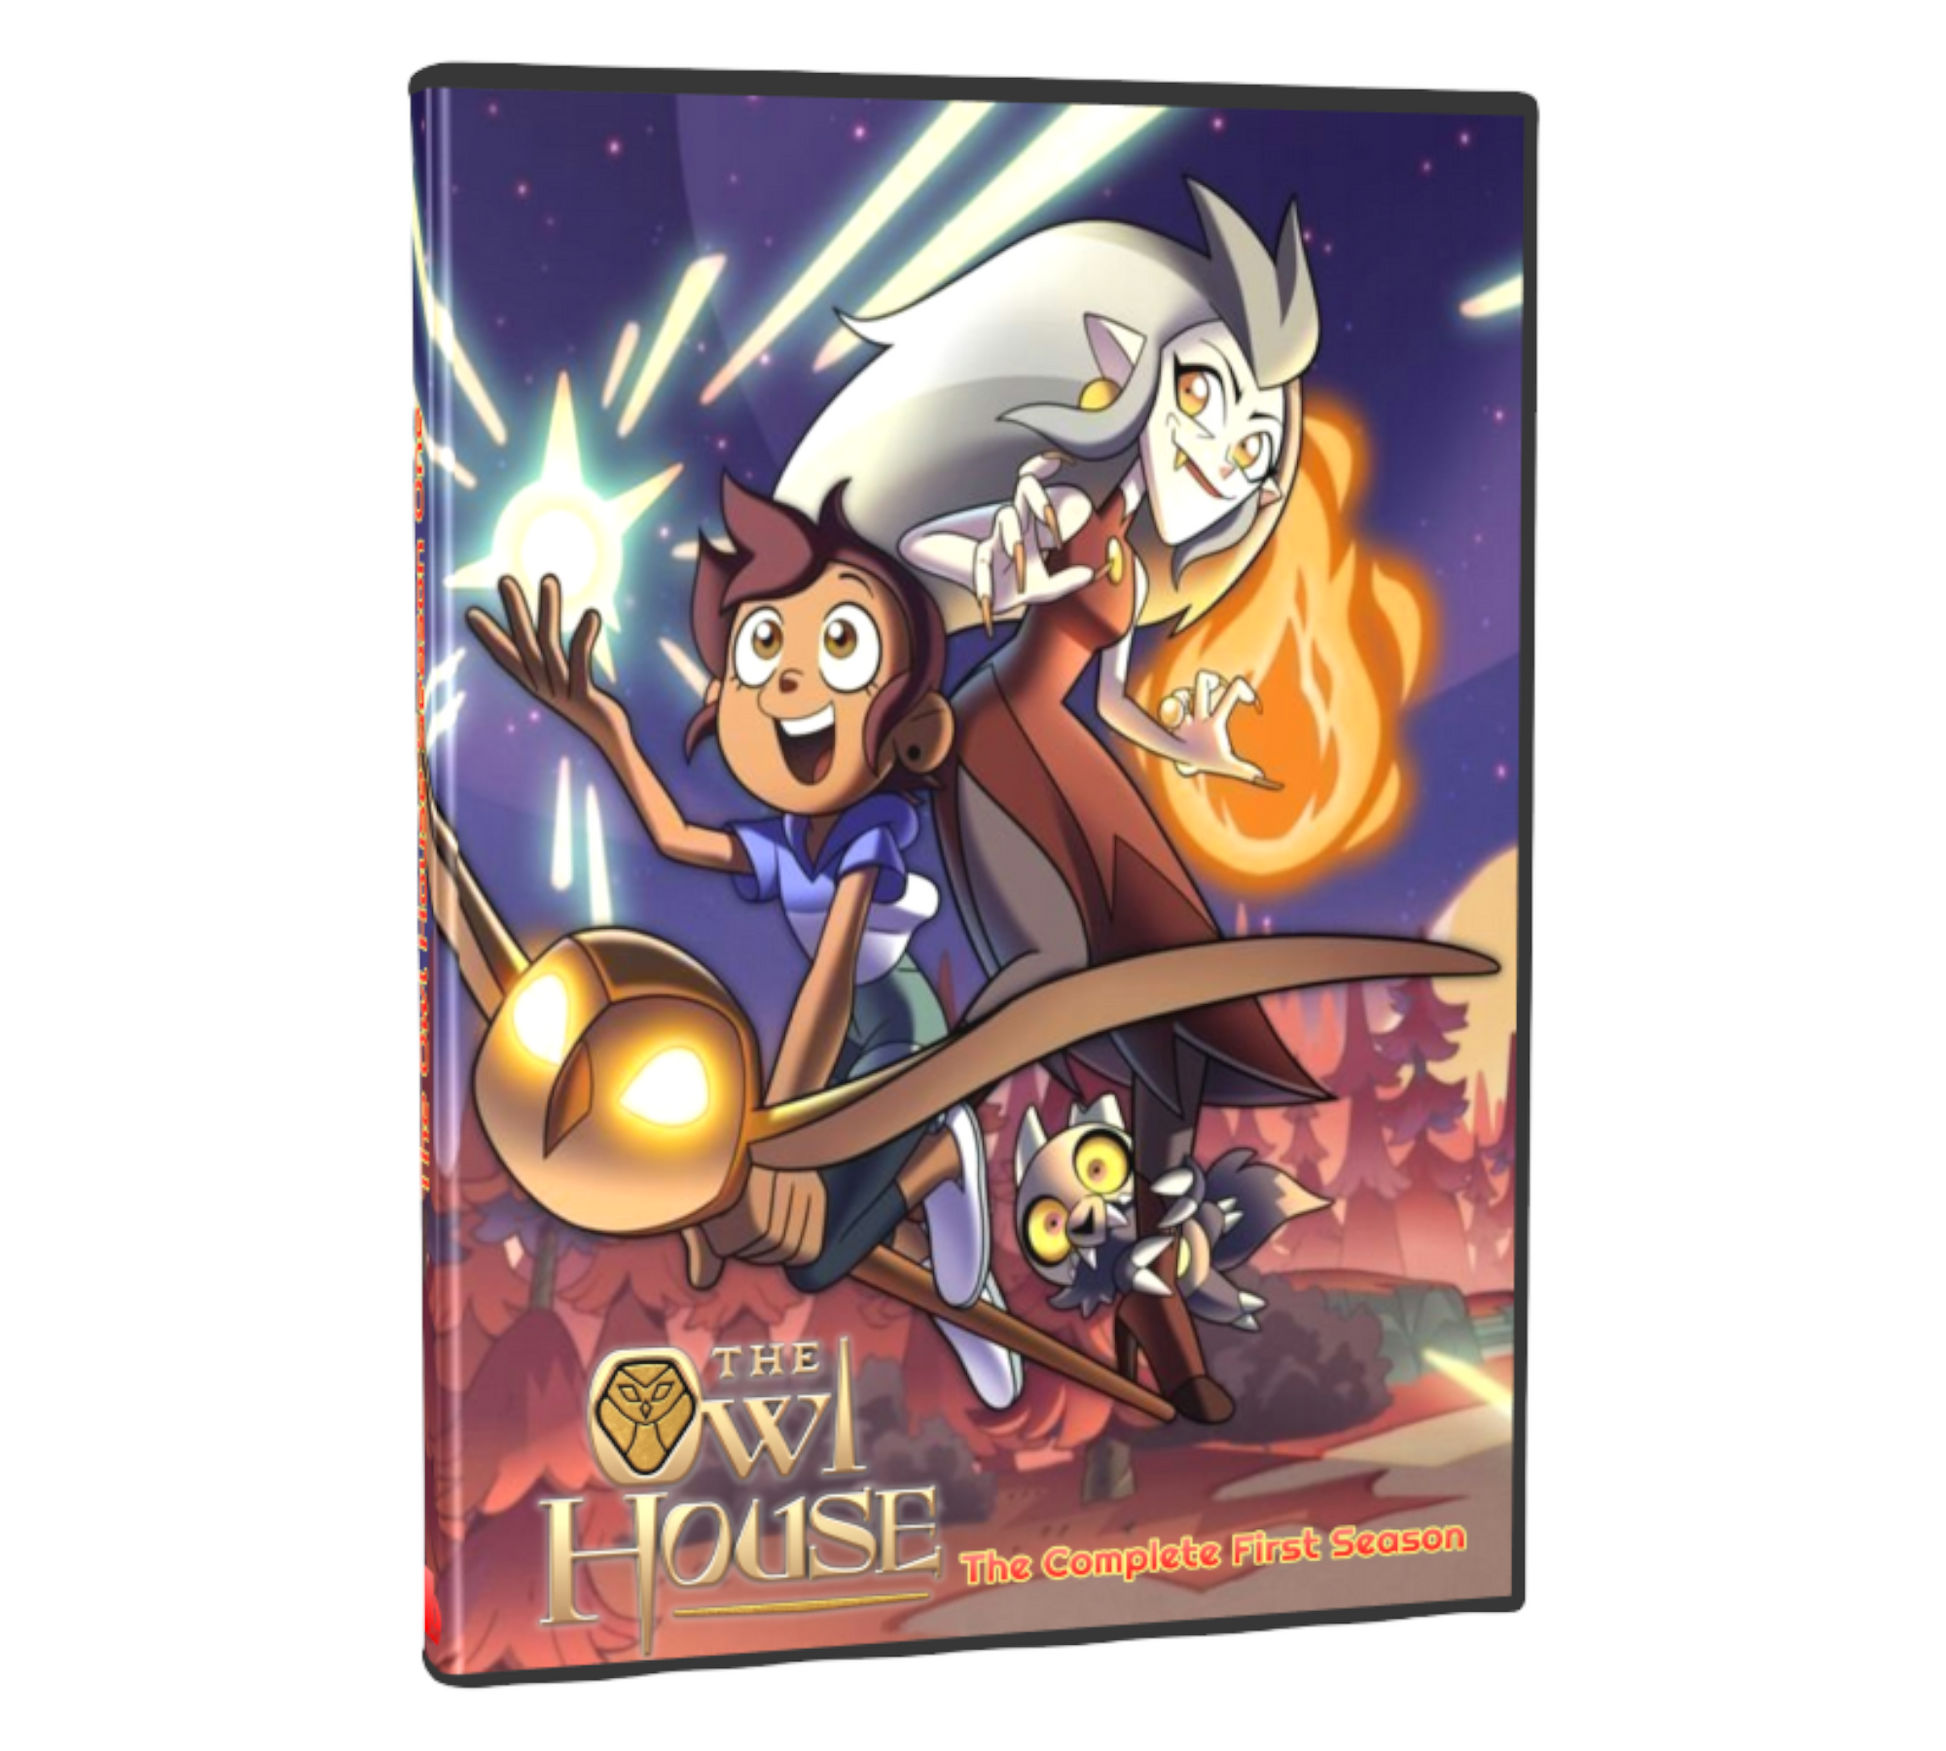 The Owl House Season 1 Episode 3: I Was A Teenage Abomination Review 